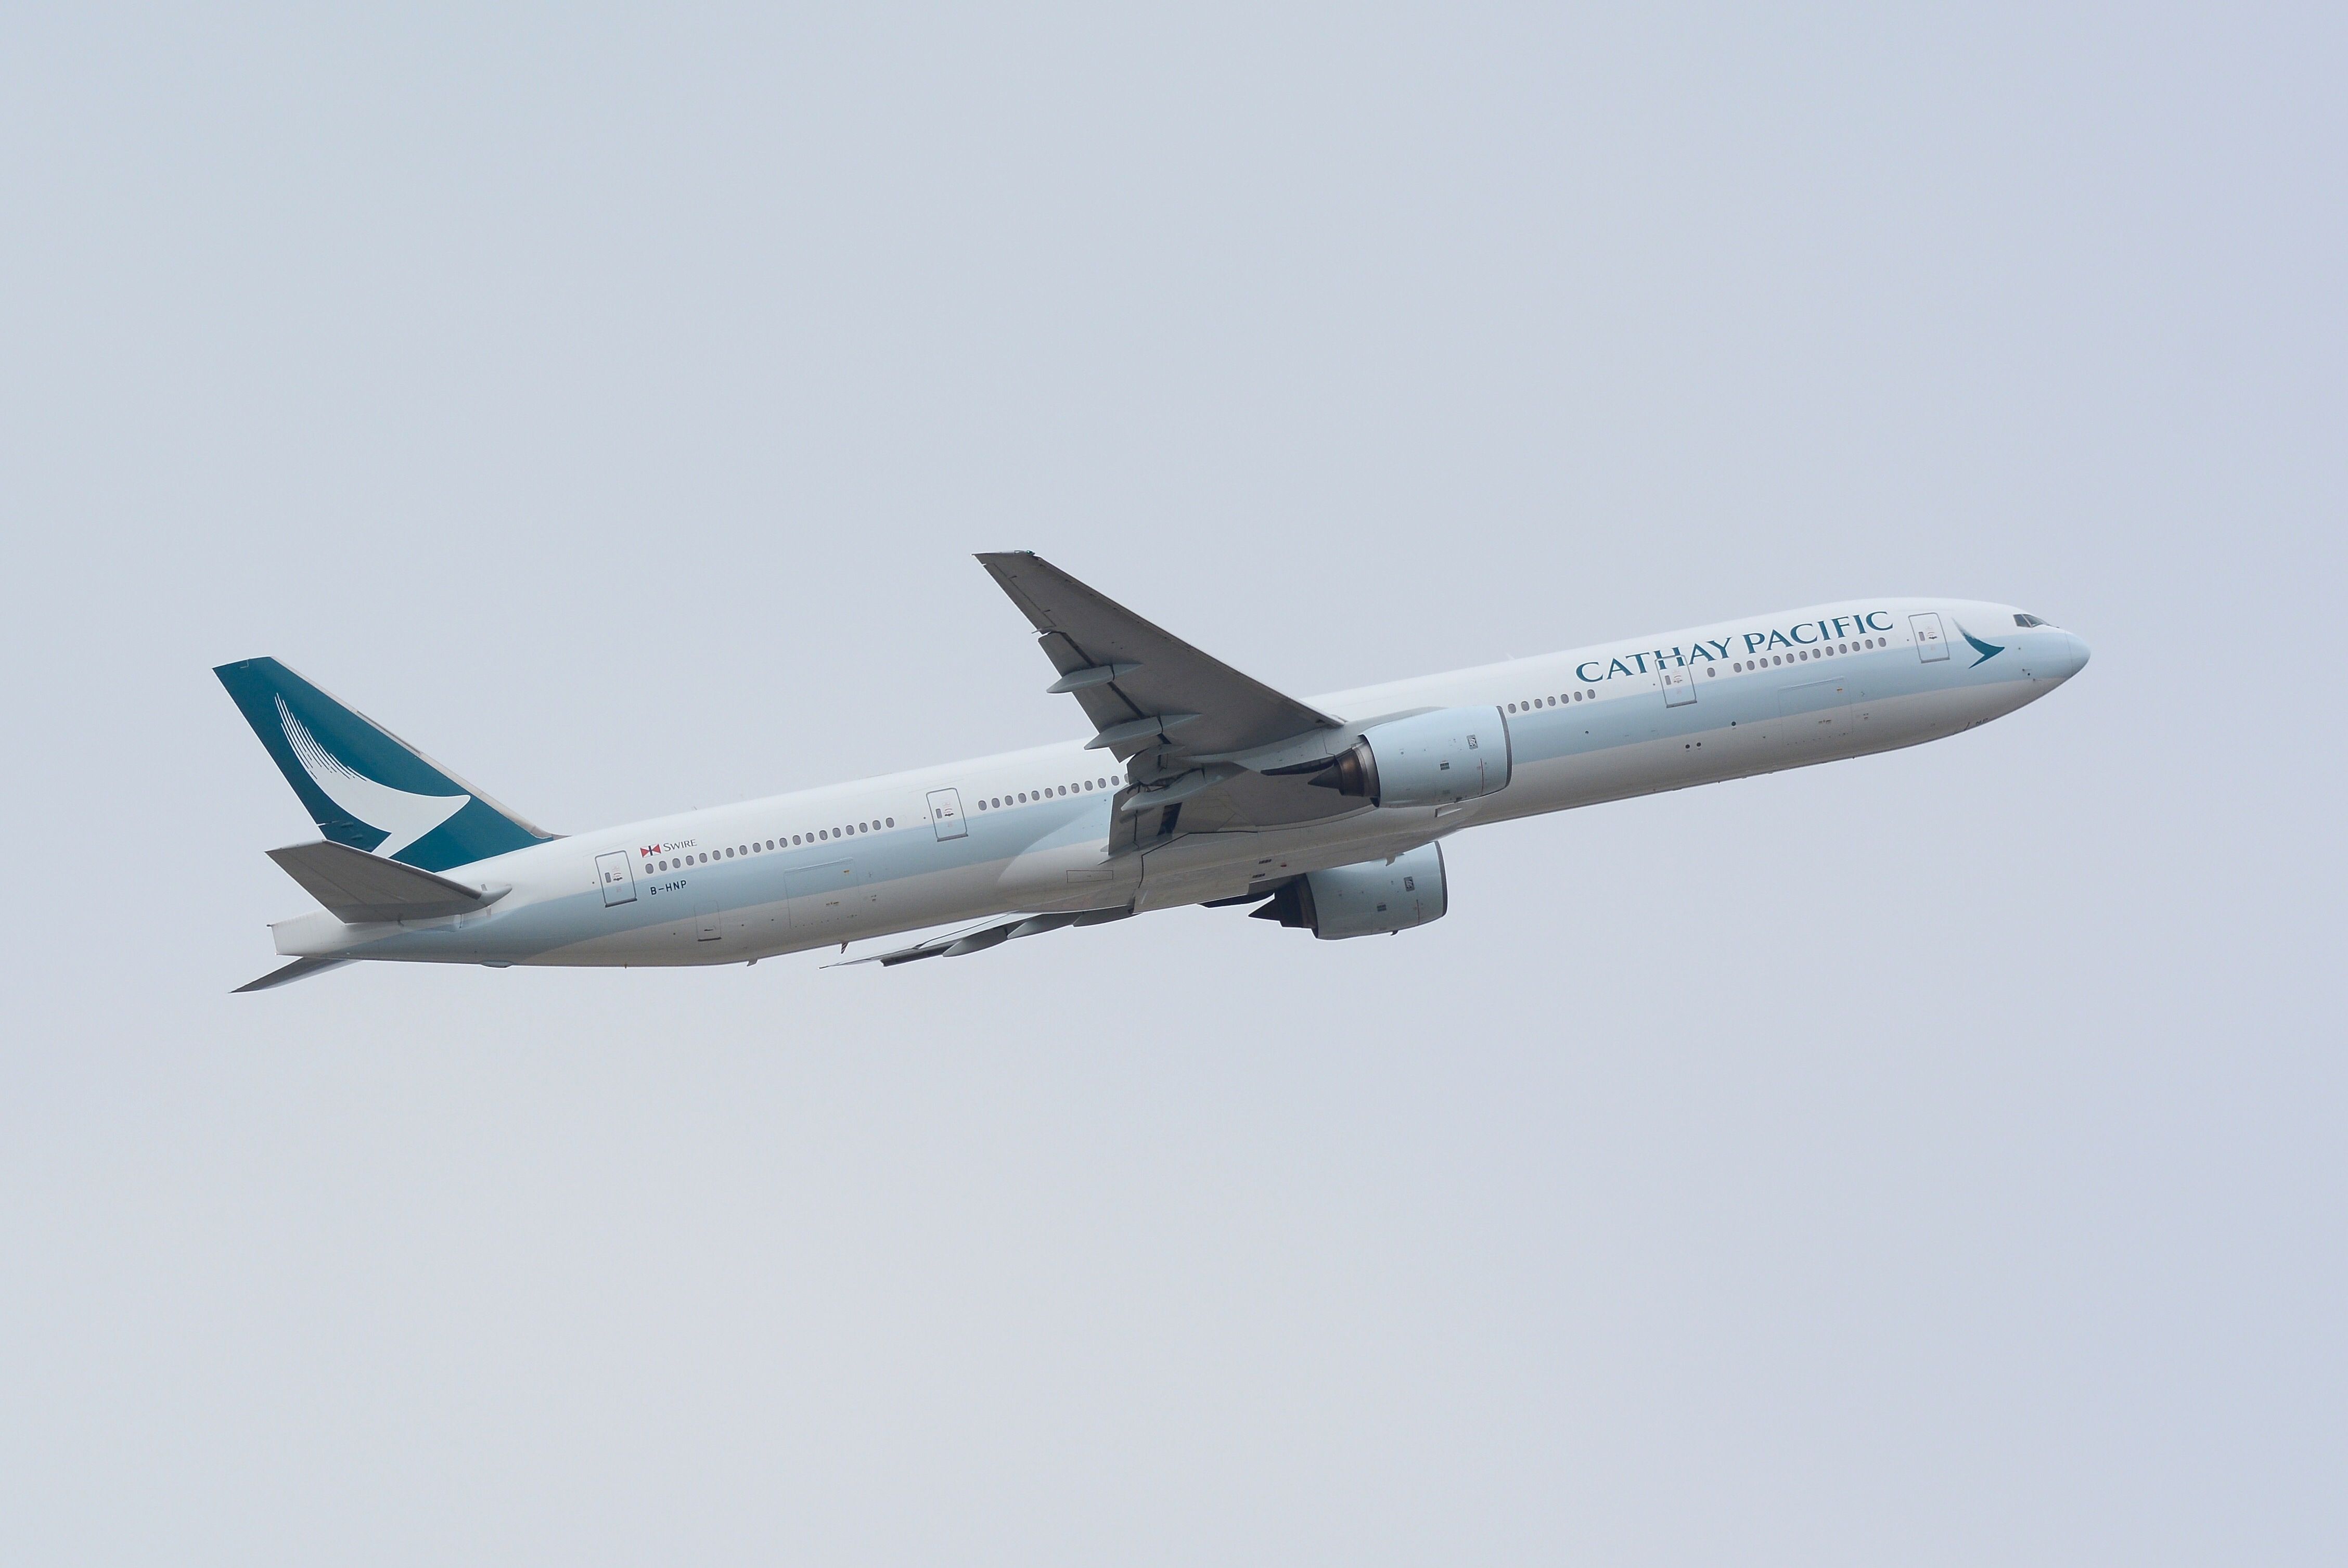 25 Years Ago Today The Boeing 777-300 Made Its First Flight